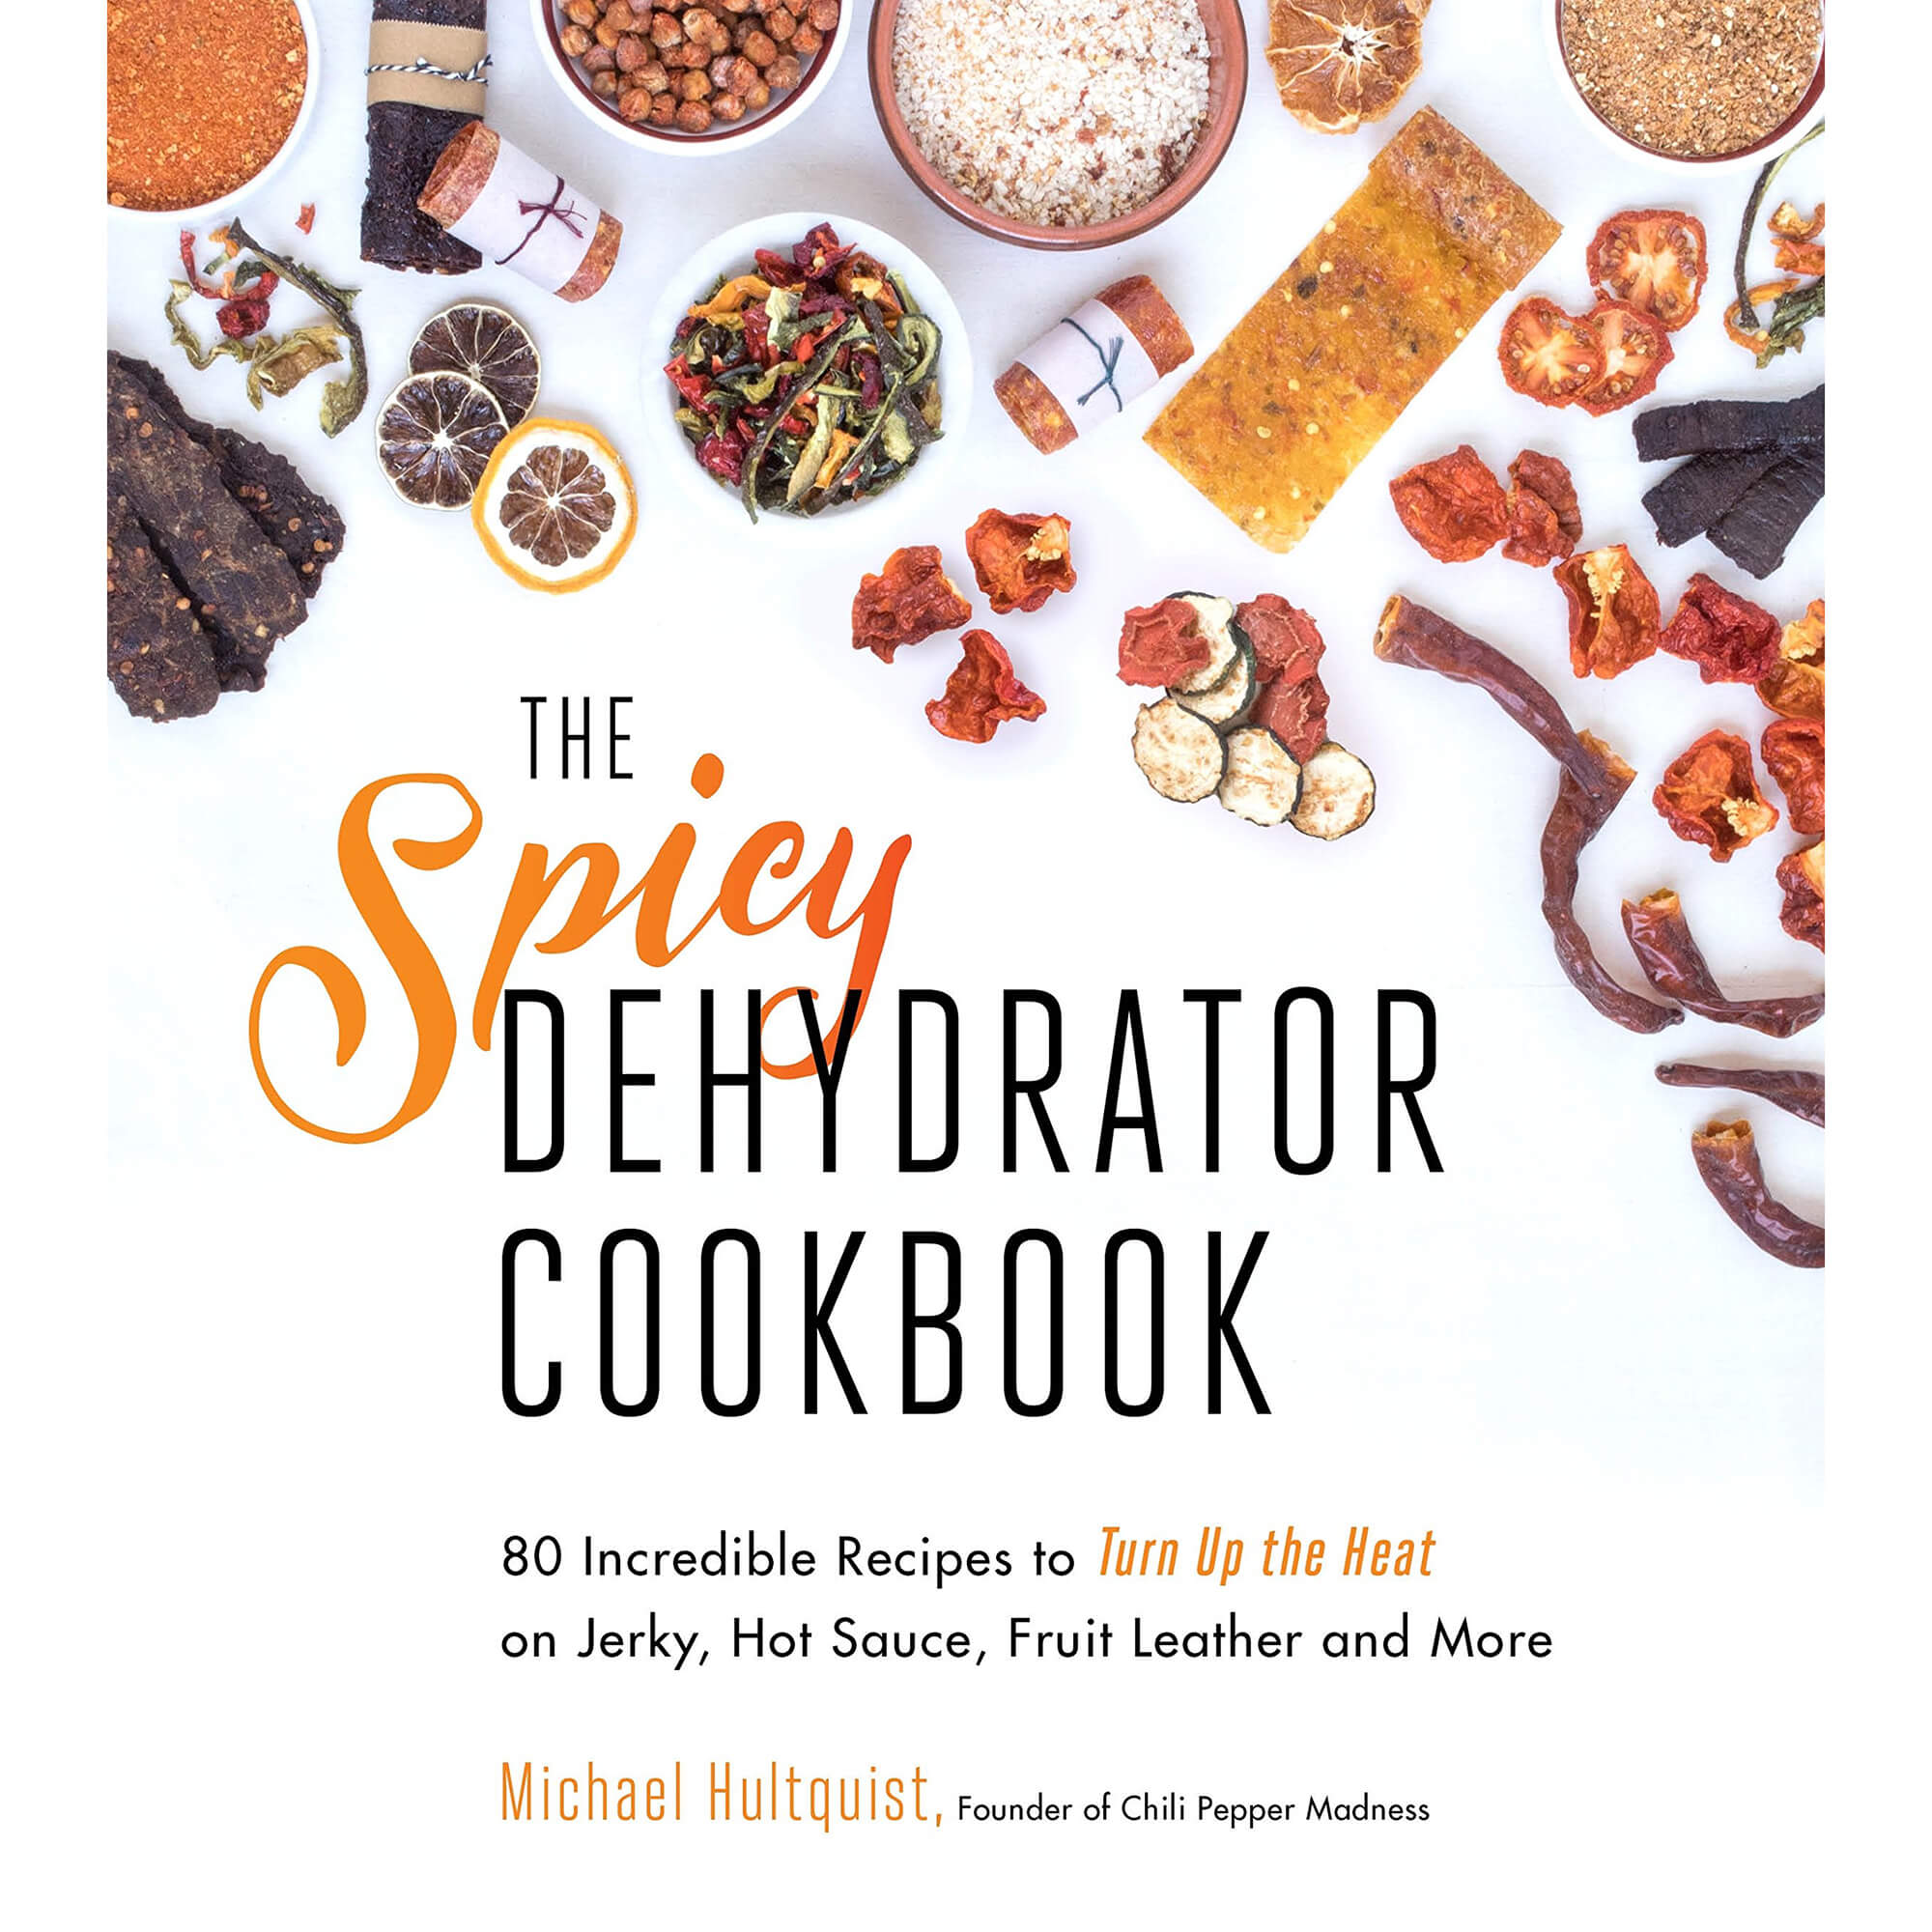 The Spicy Dehydrator Cookbook: 95 Incredible Recipes to Turn Up the Heat on Jerky, Hot Sauce, Fruit Leather and More front cover.